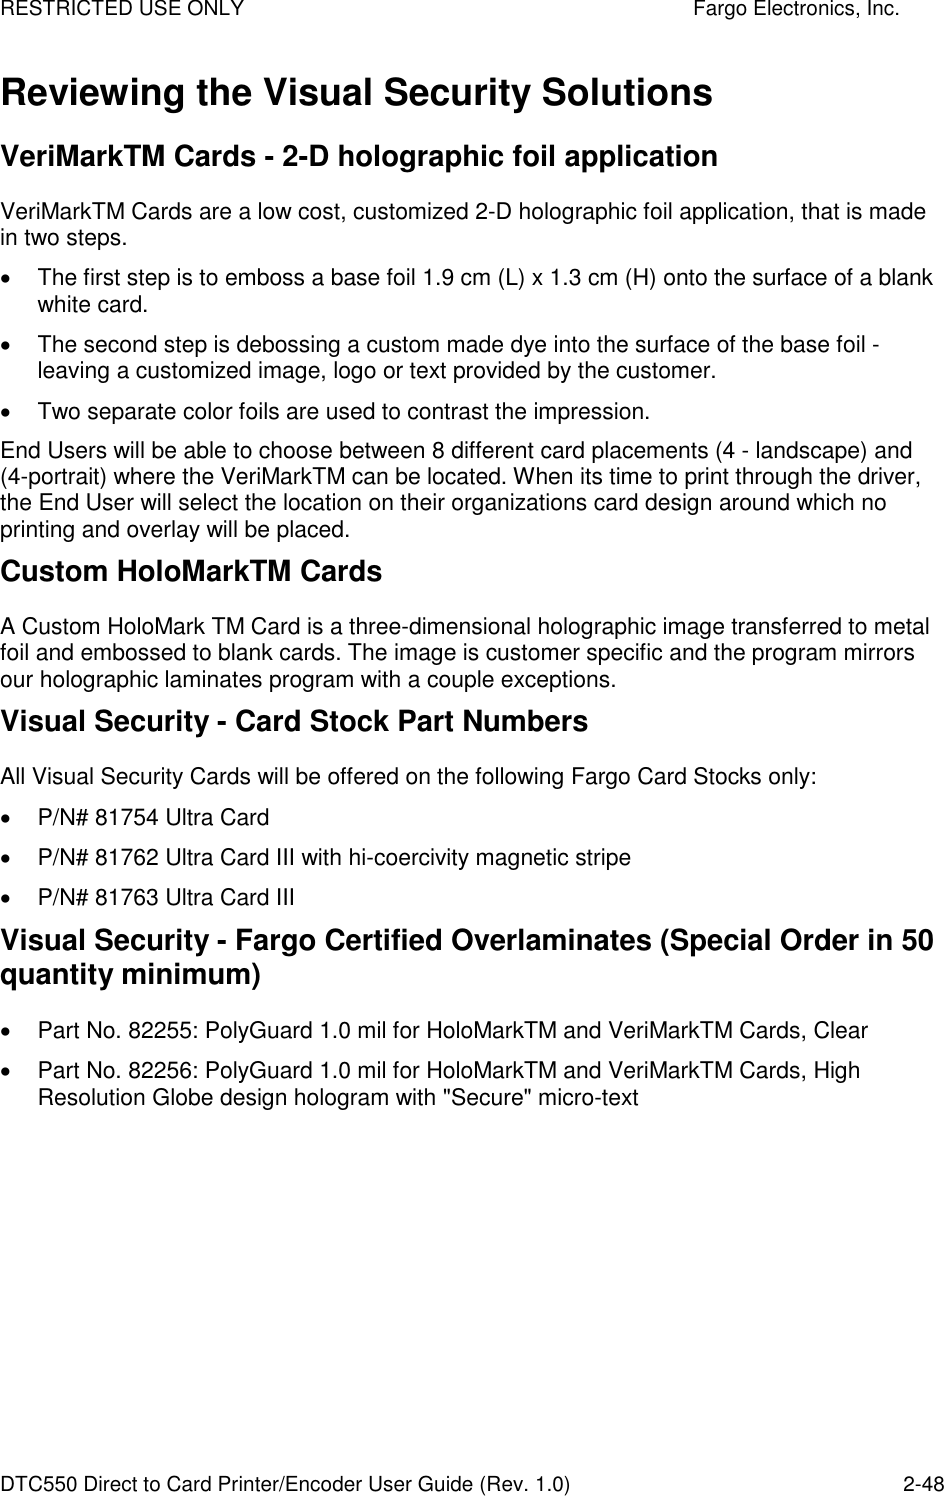 RESTRICTED USE ONLY    Fargo Electronics, Inc. DTC550 Direct to Card Printer/Encoder User Guide (Rev. 1.0)  2-48 Reviewing the Visual Security Solutions VeriMarkTM Cards - 2-D holographic foil application VeriMarkTM Cards are a low cost, customized 2-D holographic foil application, that is made in two steps.   The first step is to emboss a base foil 1.9 cm (L) x 1.3 cm (H) onto the surface of a blank white card.   The second step is debossing a custom made dye into the surface of the base foil - leaving a customized image, logo or text provided by the customer.   Two separate color foils are used to contrast the impression. End Users will be able to choose between 8 different card placements (4 - landscape) and (4-portrait) where the VeriMarkTM can be located. When its time to print through the driver, the End User will select the location on their organizations card design around which no printing and overlay will be placed. Custom HoloMarkTM Cards A Custom HoloMark TM Card is a three-dimensional holographic image transferred to metal foil and embossed to blank cards. The image is customer specific and the program mirrors our holographic laminates program with a couple exceptions. Visual Security - Card Stock Part Numbers All Visual Security Cards will be offered on the following Fargo Card Stocks only:   P/N# 81754 Ultra Card   P/N# 81762 Ultra Card III with hi-coercivity magnetic stripe   P/N# 81763 Ultra Card III Visual Security - Fargo Certified Overlaminates (Special Order in 50 quantity minimum)   Part No. 82255: PolyGuard 1.0 mil for HoloMarkTM and VeriMarkTM Cards, Clear   Part No. 82256: PolyGuard 1.0 mil for HoloMarkTM and VeriMarkTM Cards, High Resolution Globe design hologram with &quot;Secure&quot; micro-text 